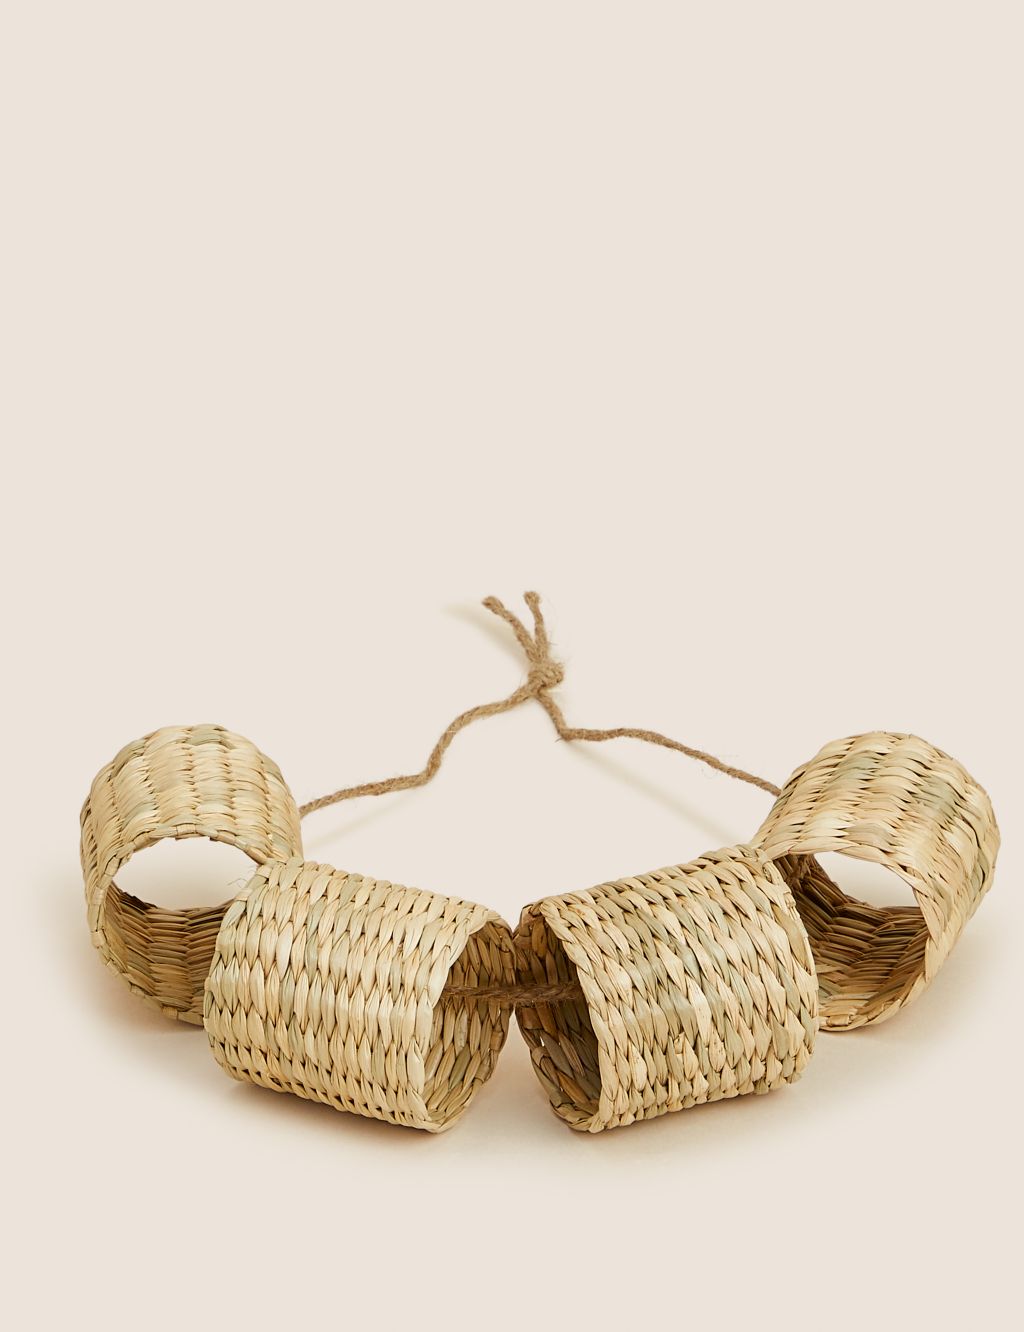 Set of 4 Seagrass Napkin Rings image 1